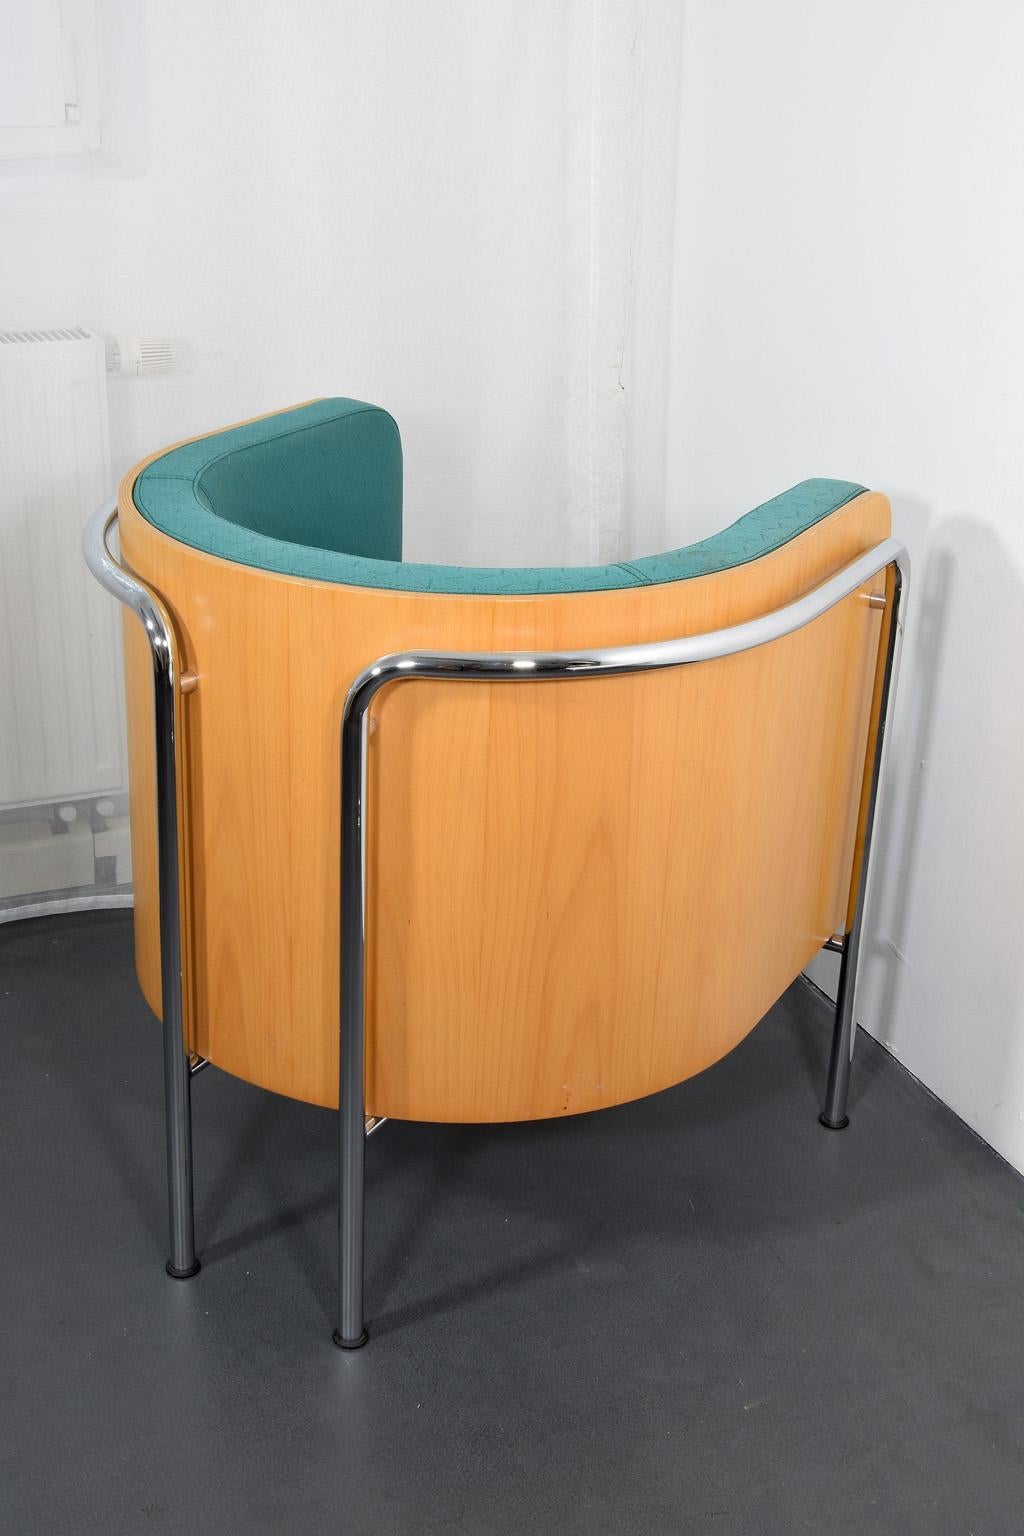 Thonet lounge chair modell S 3001 from Christoph Zschocke for Thonet, 1990.
Chromed steel tube. Bent plywood. Original turquoise upholstery fabric.
Minor stain on the upholstered seat.
  